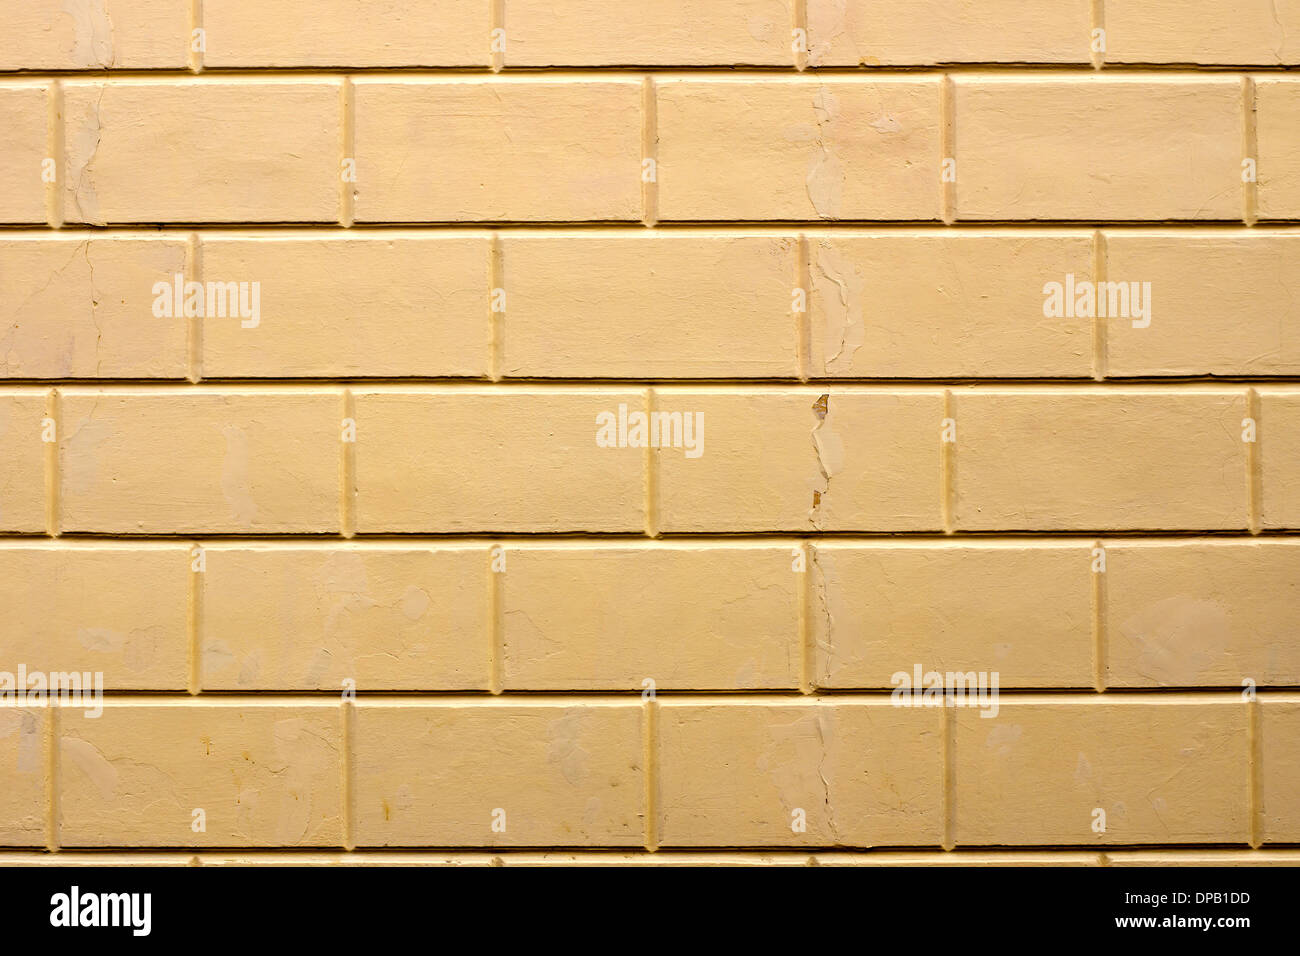 Wall pargeted in brick style Stock Photo